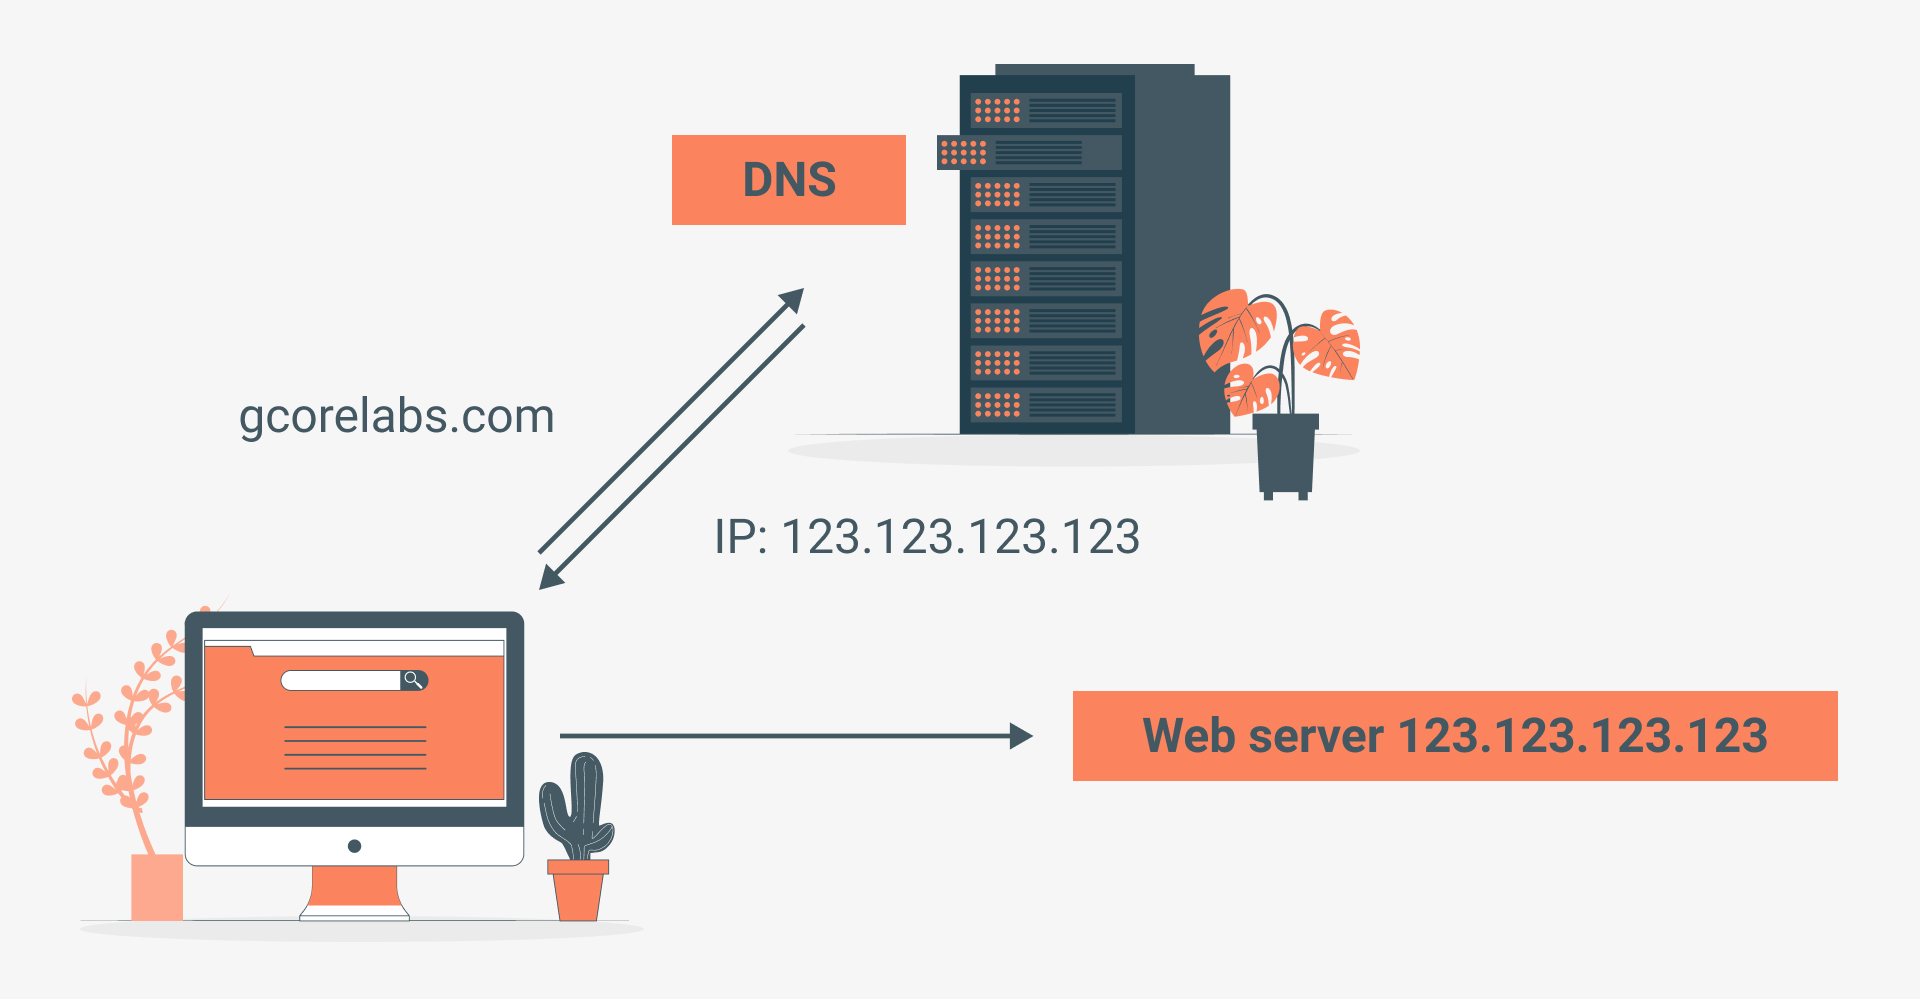 Configure the DNS cache to see if it causes any errors in Chrome